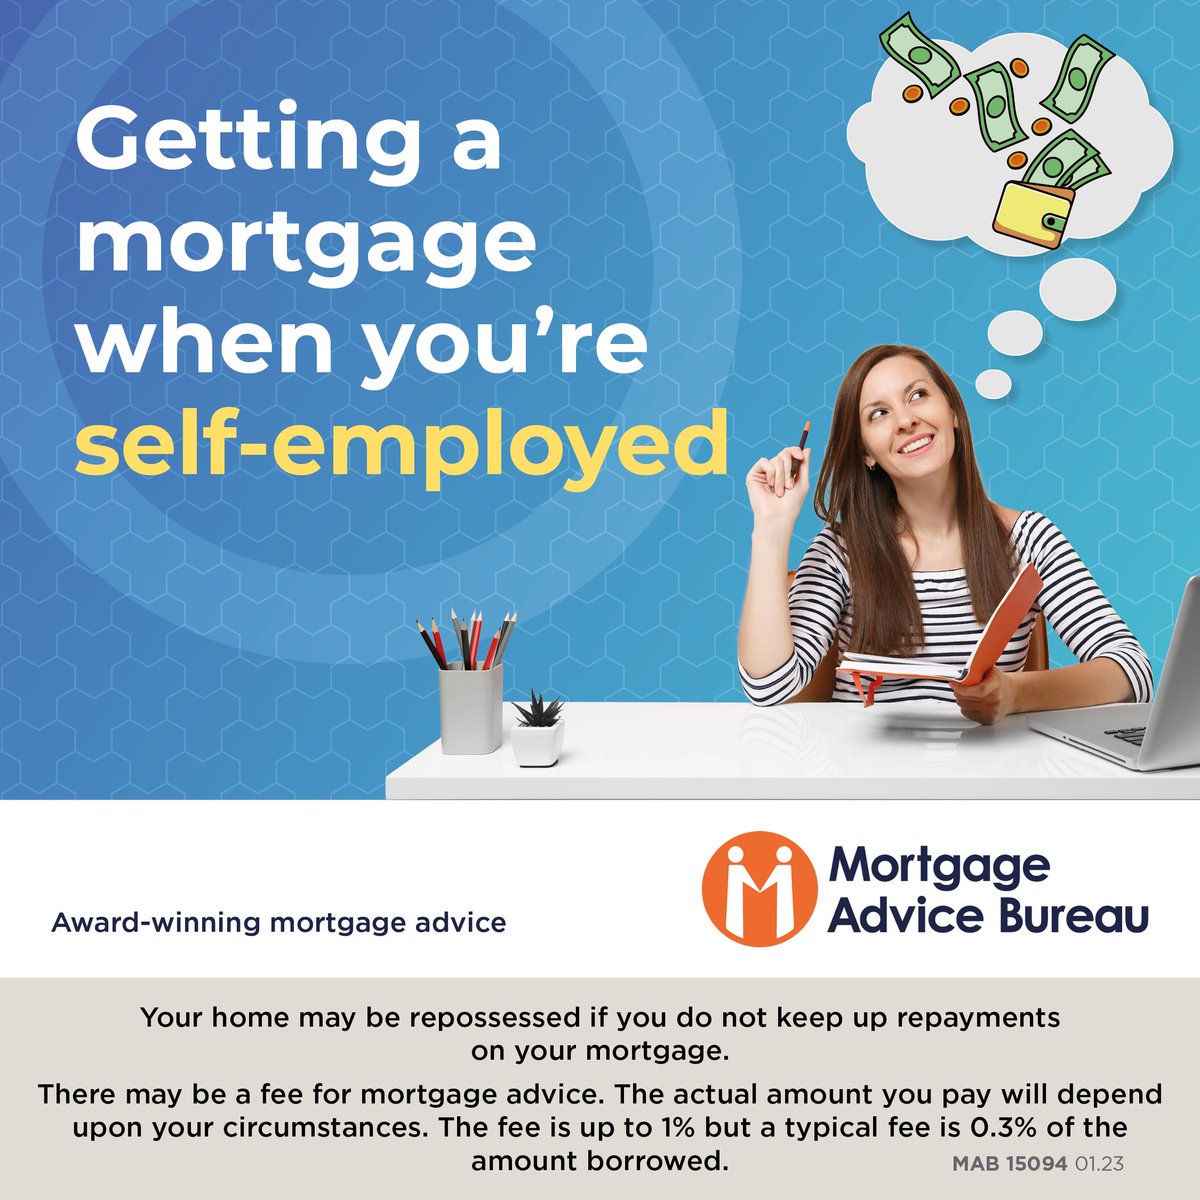 Are you self-employed and looking to buy a house? 🏡 Don't worry about your employment status limiting your mortgage options. You may have more choices than you think. 💡 Get in touch to learn more - you can call 📞 e-mail 💻 or send a DM. #Mortgage #Property #Remortgage